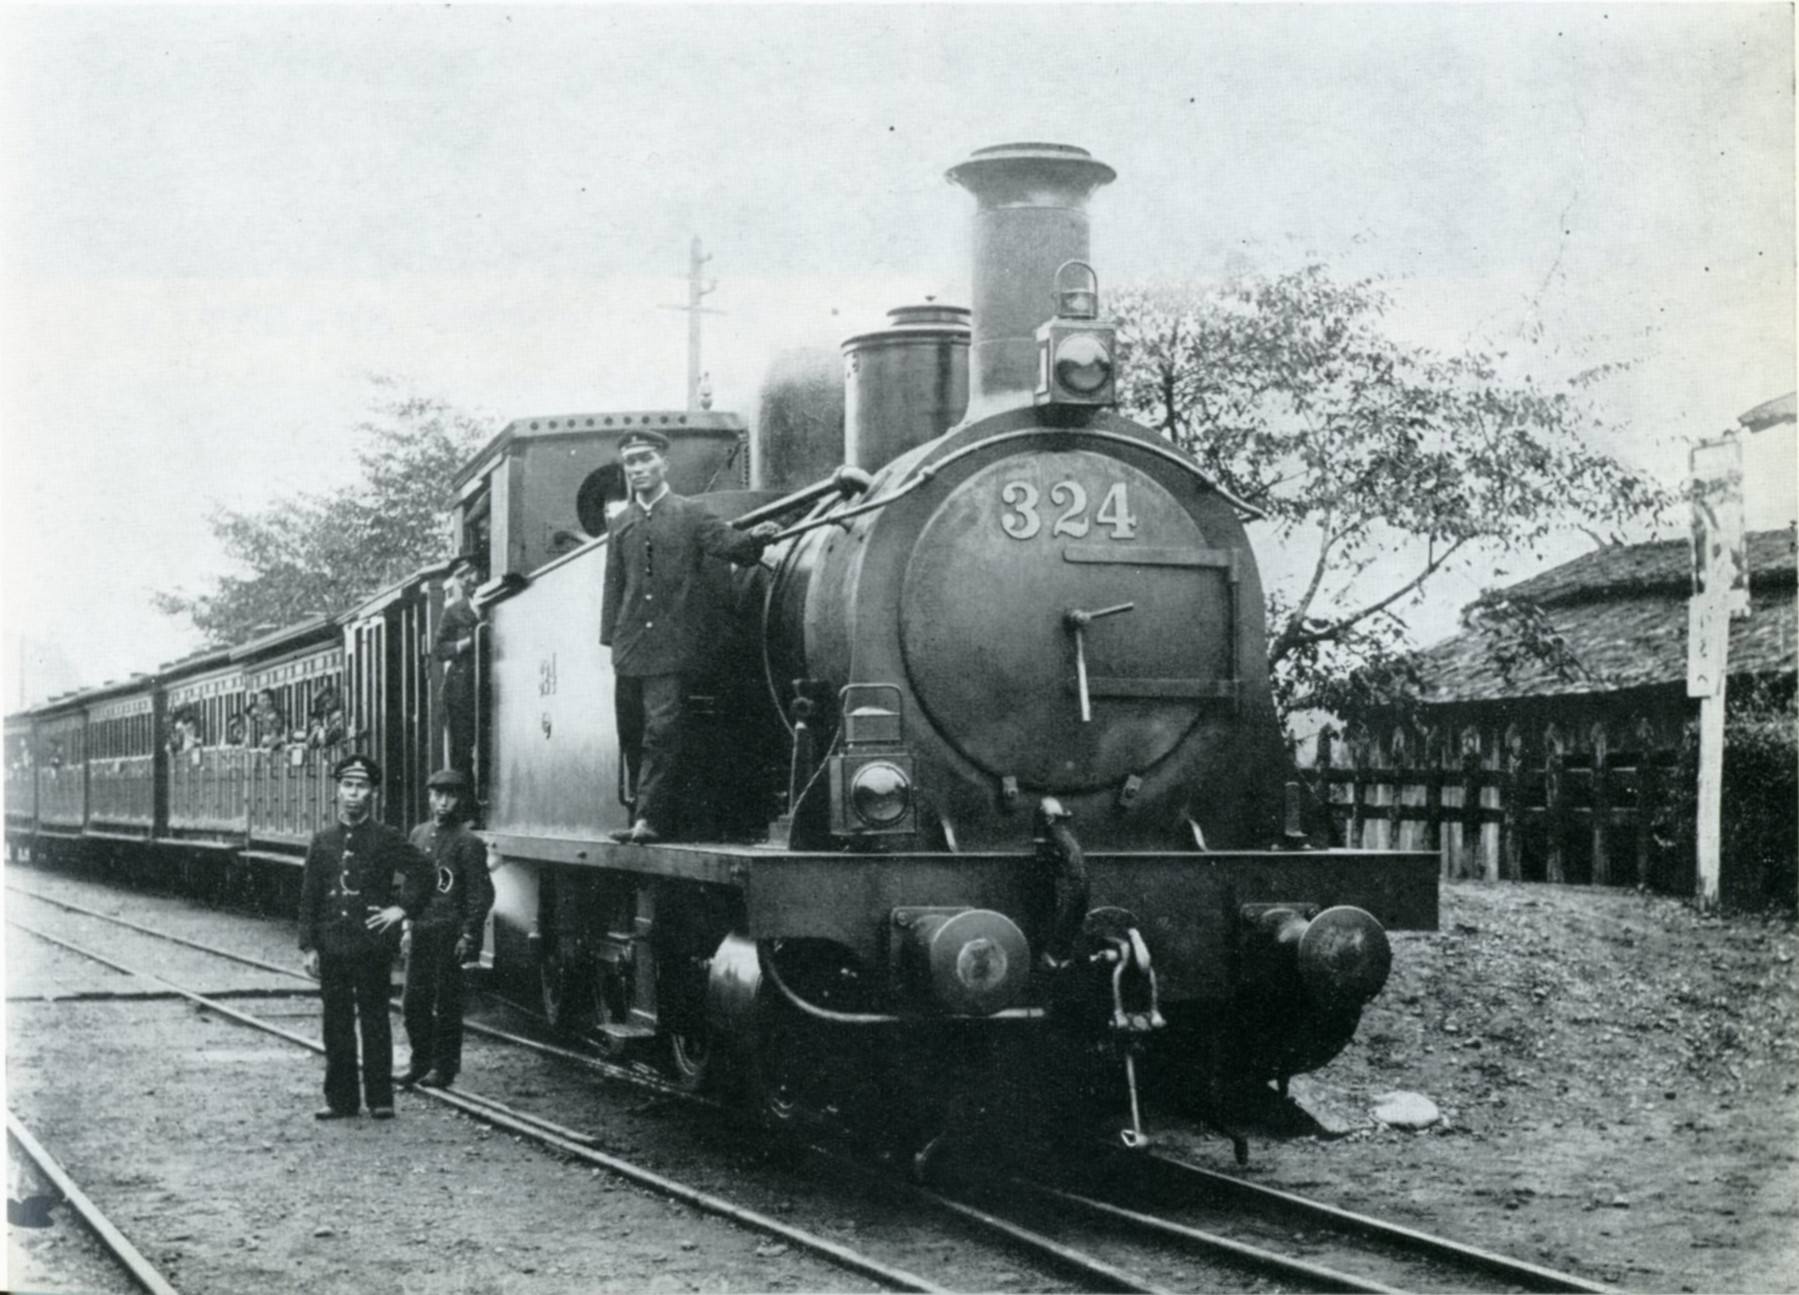 A steam engine train at Isobe Station